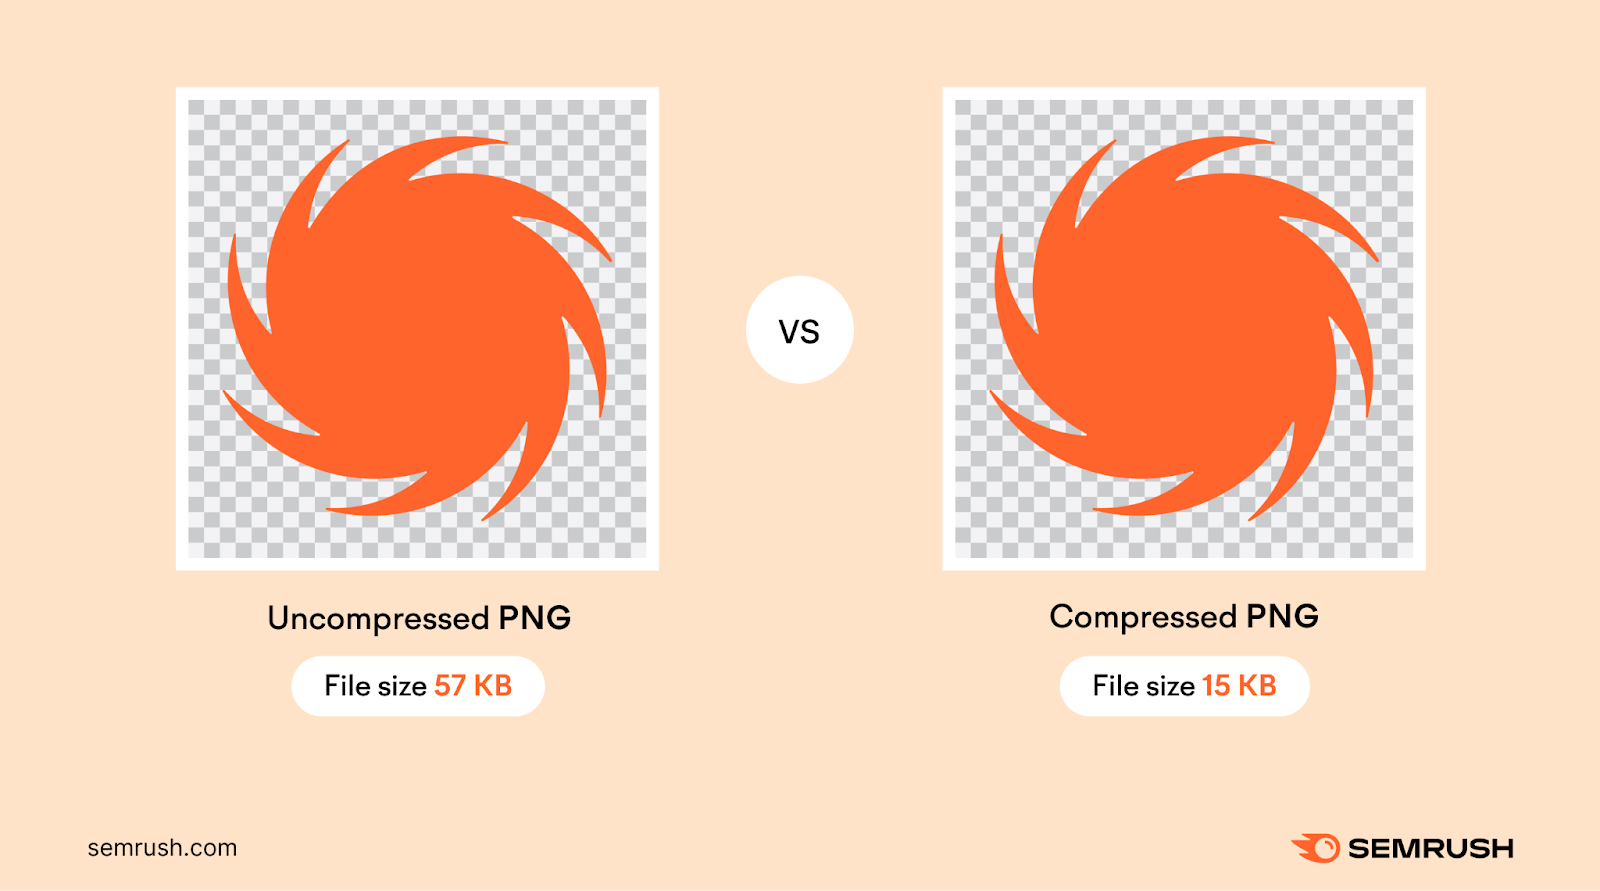 original png is 57kb while the optimized png is 15kb